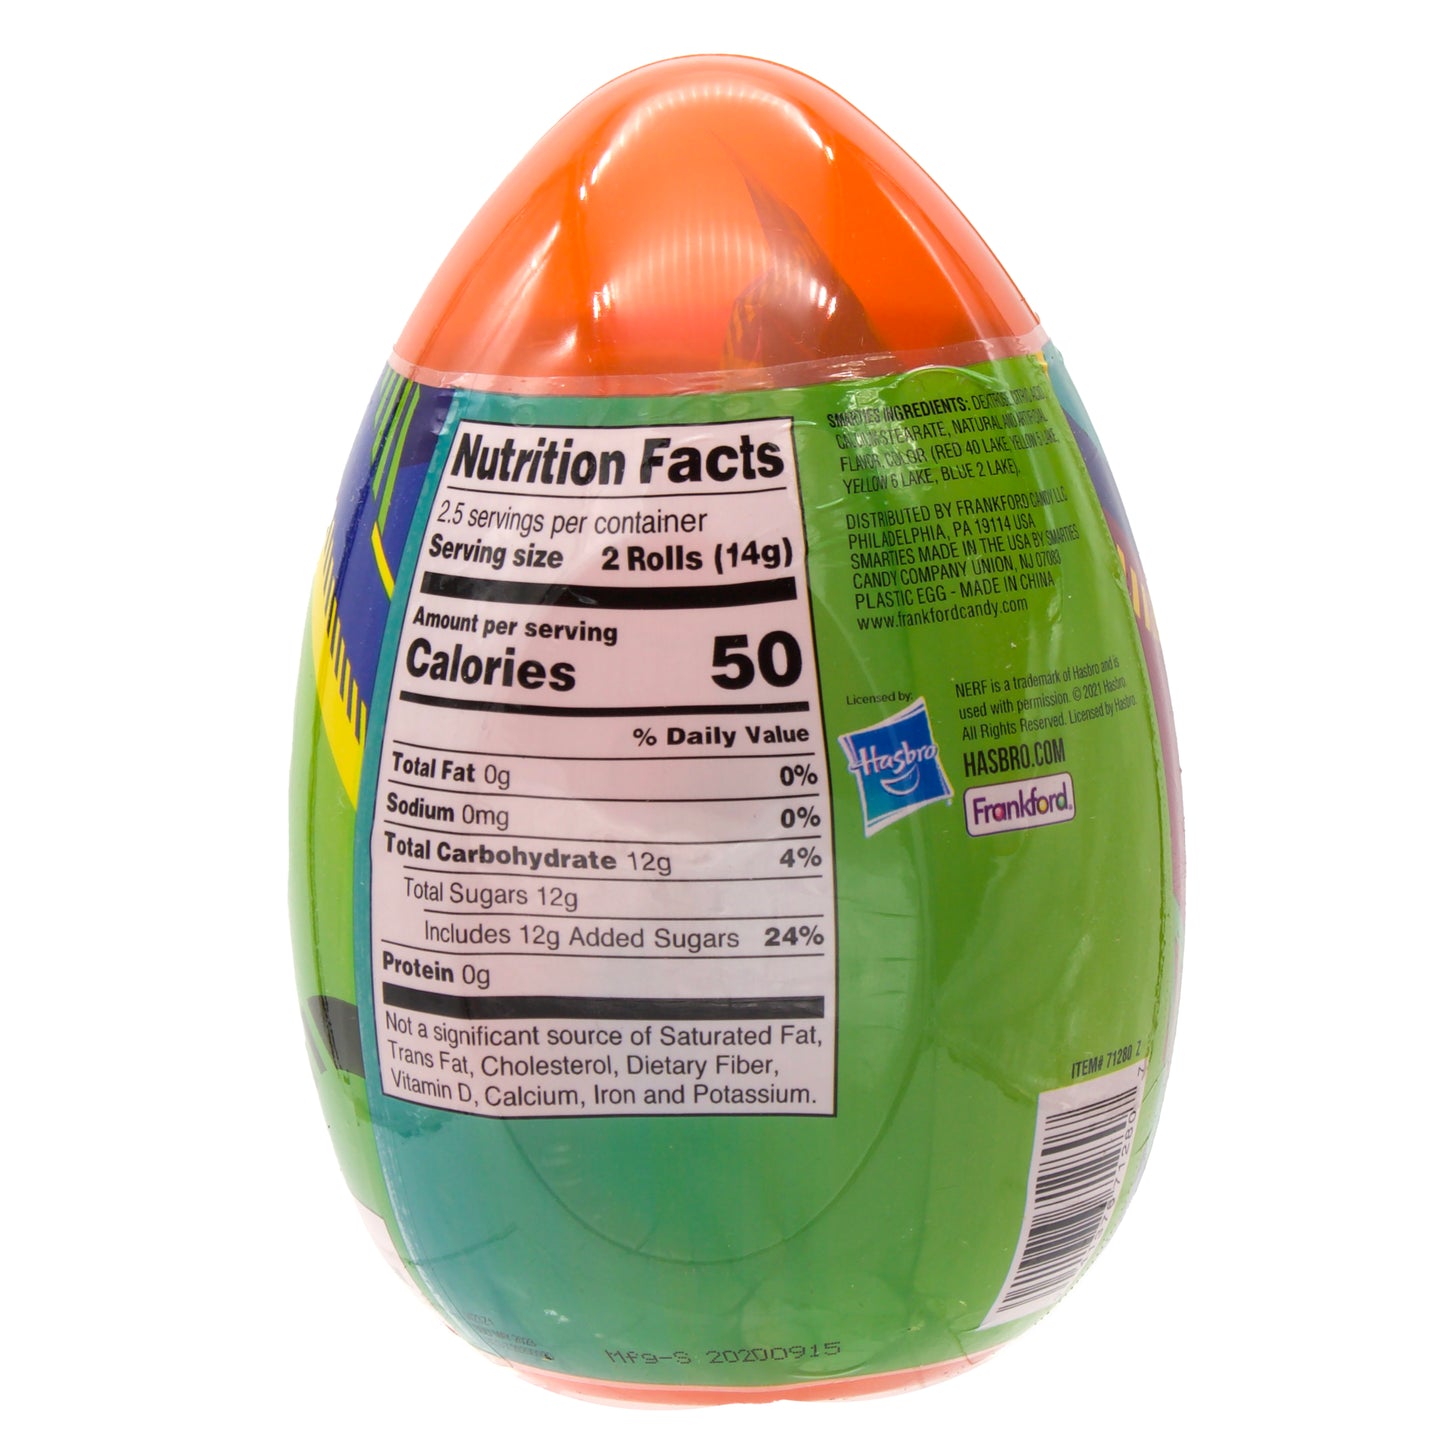 back of plastic egg with nutrition facts and ingredients